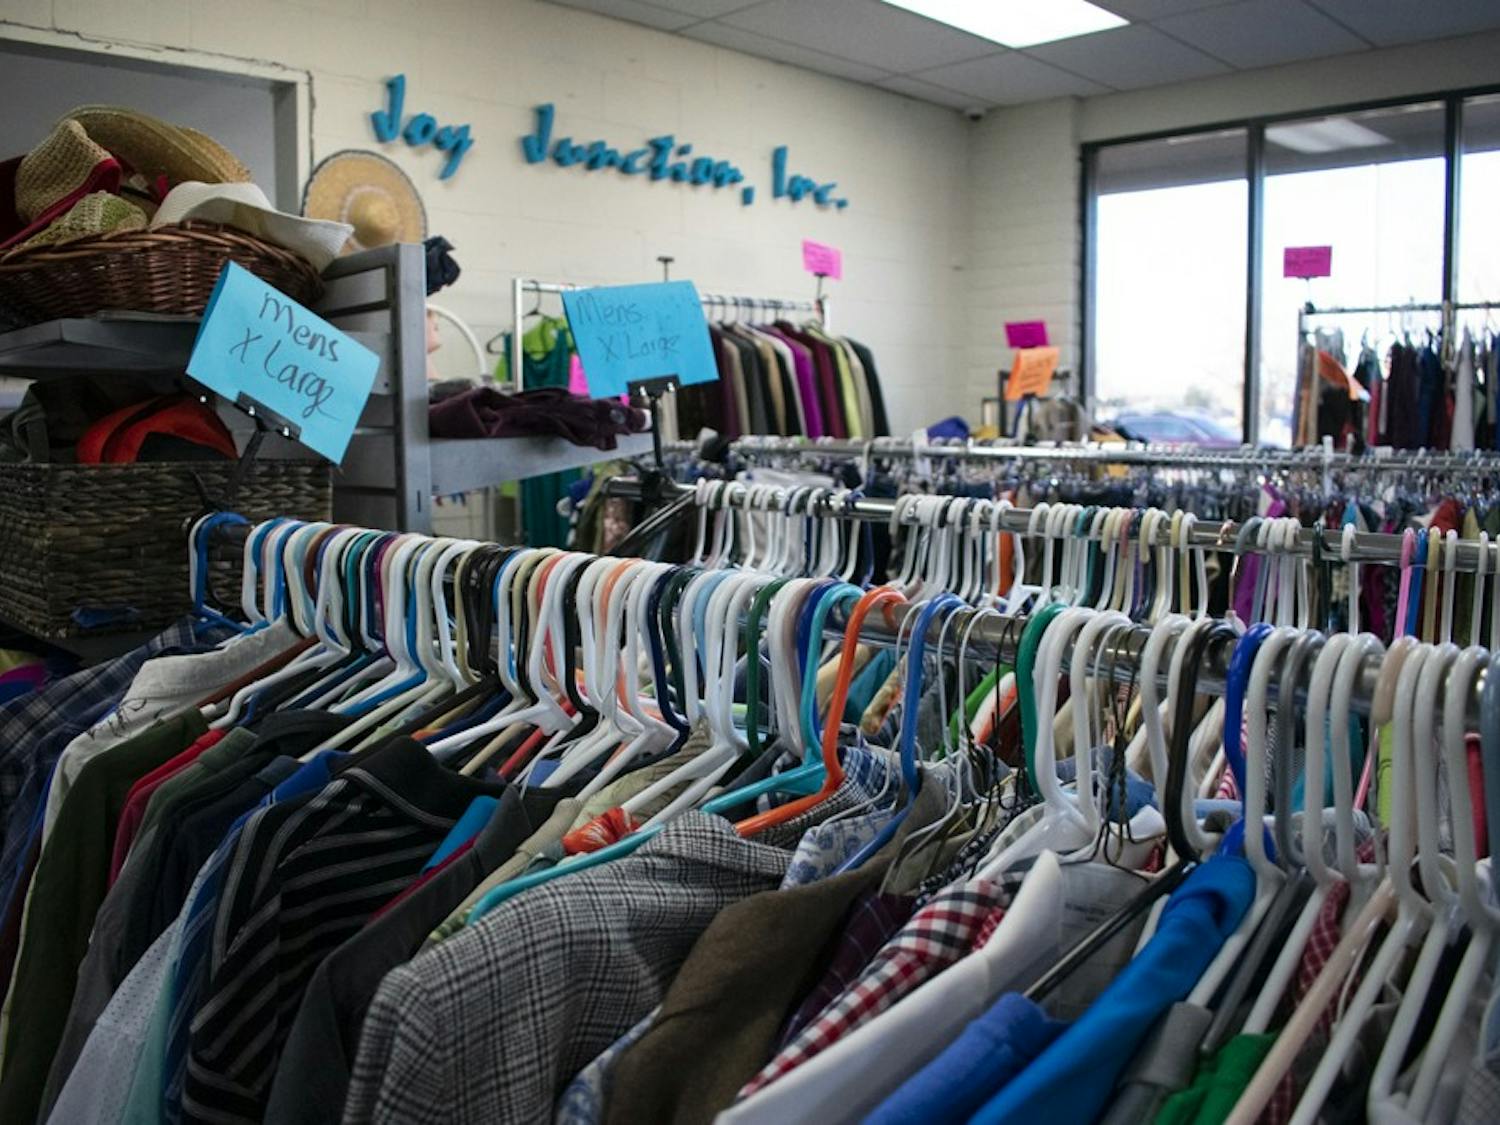 GALLERY: Ethical Thrifting